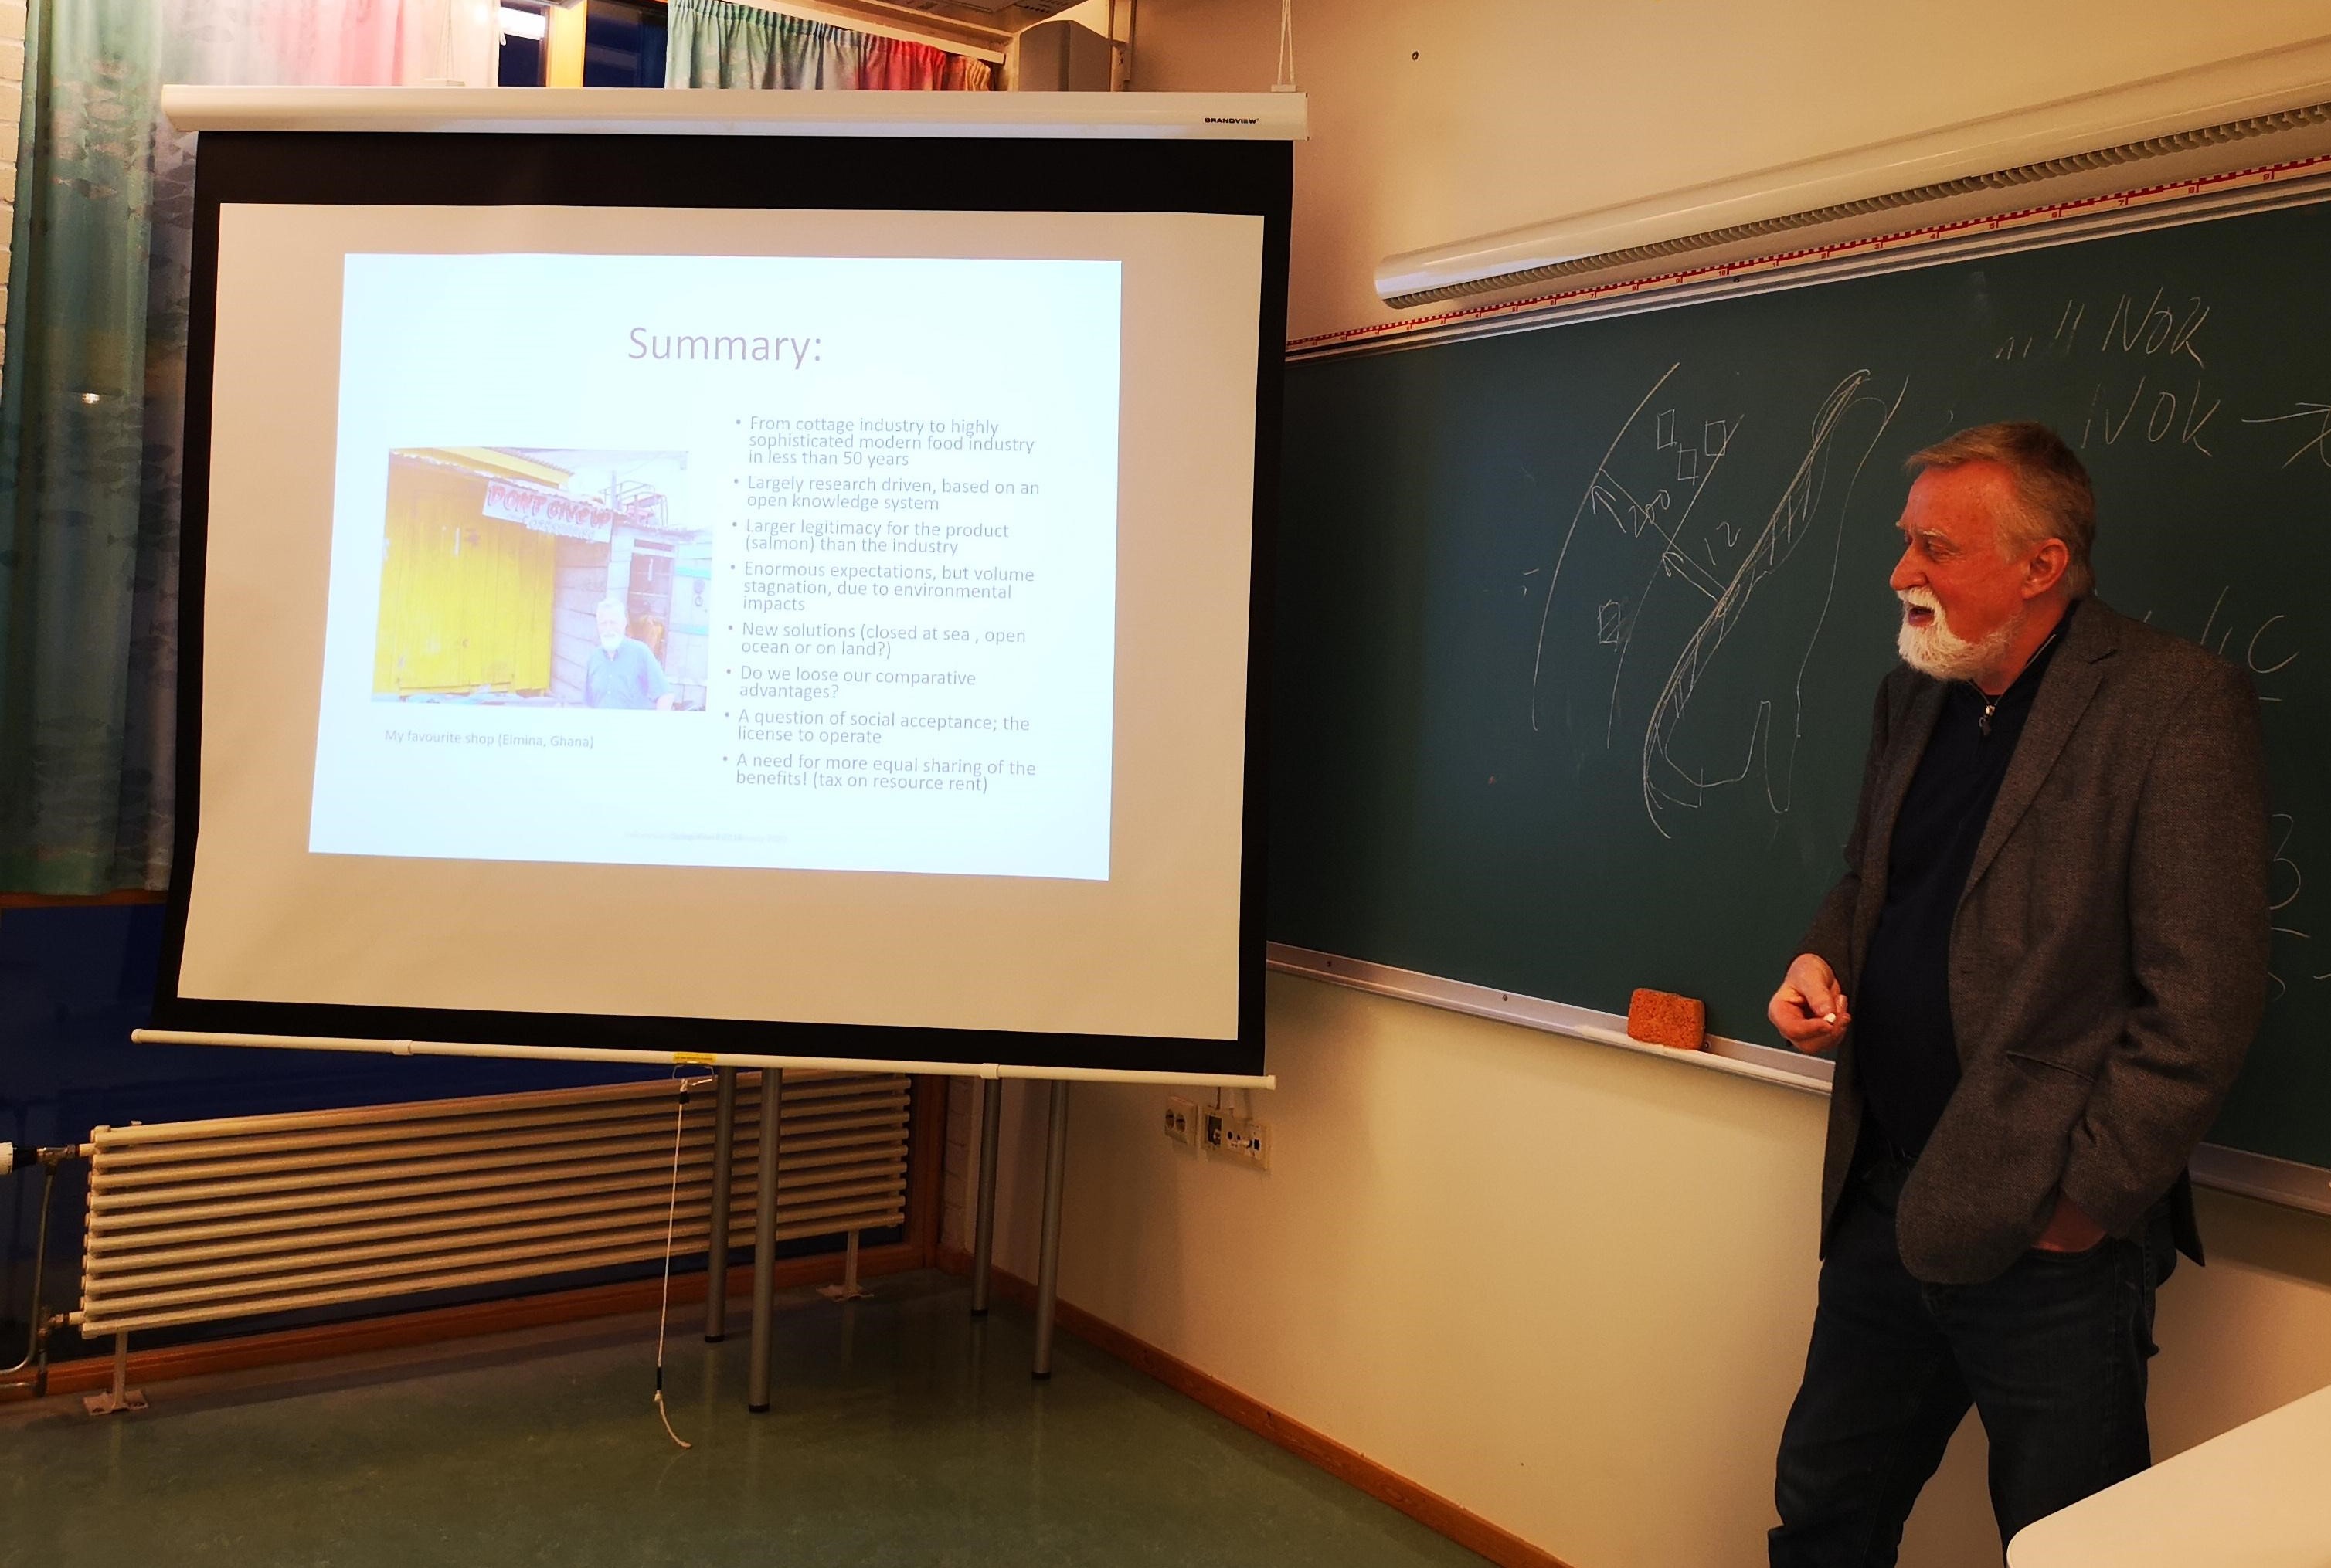 The image shows a man lecturing in front of a powerpoint